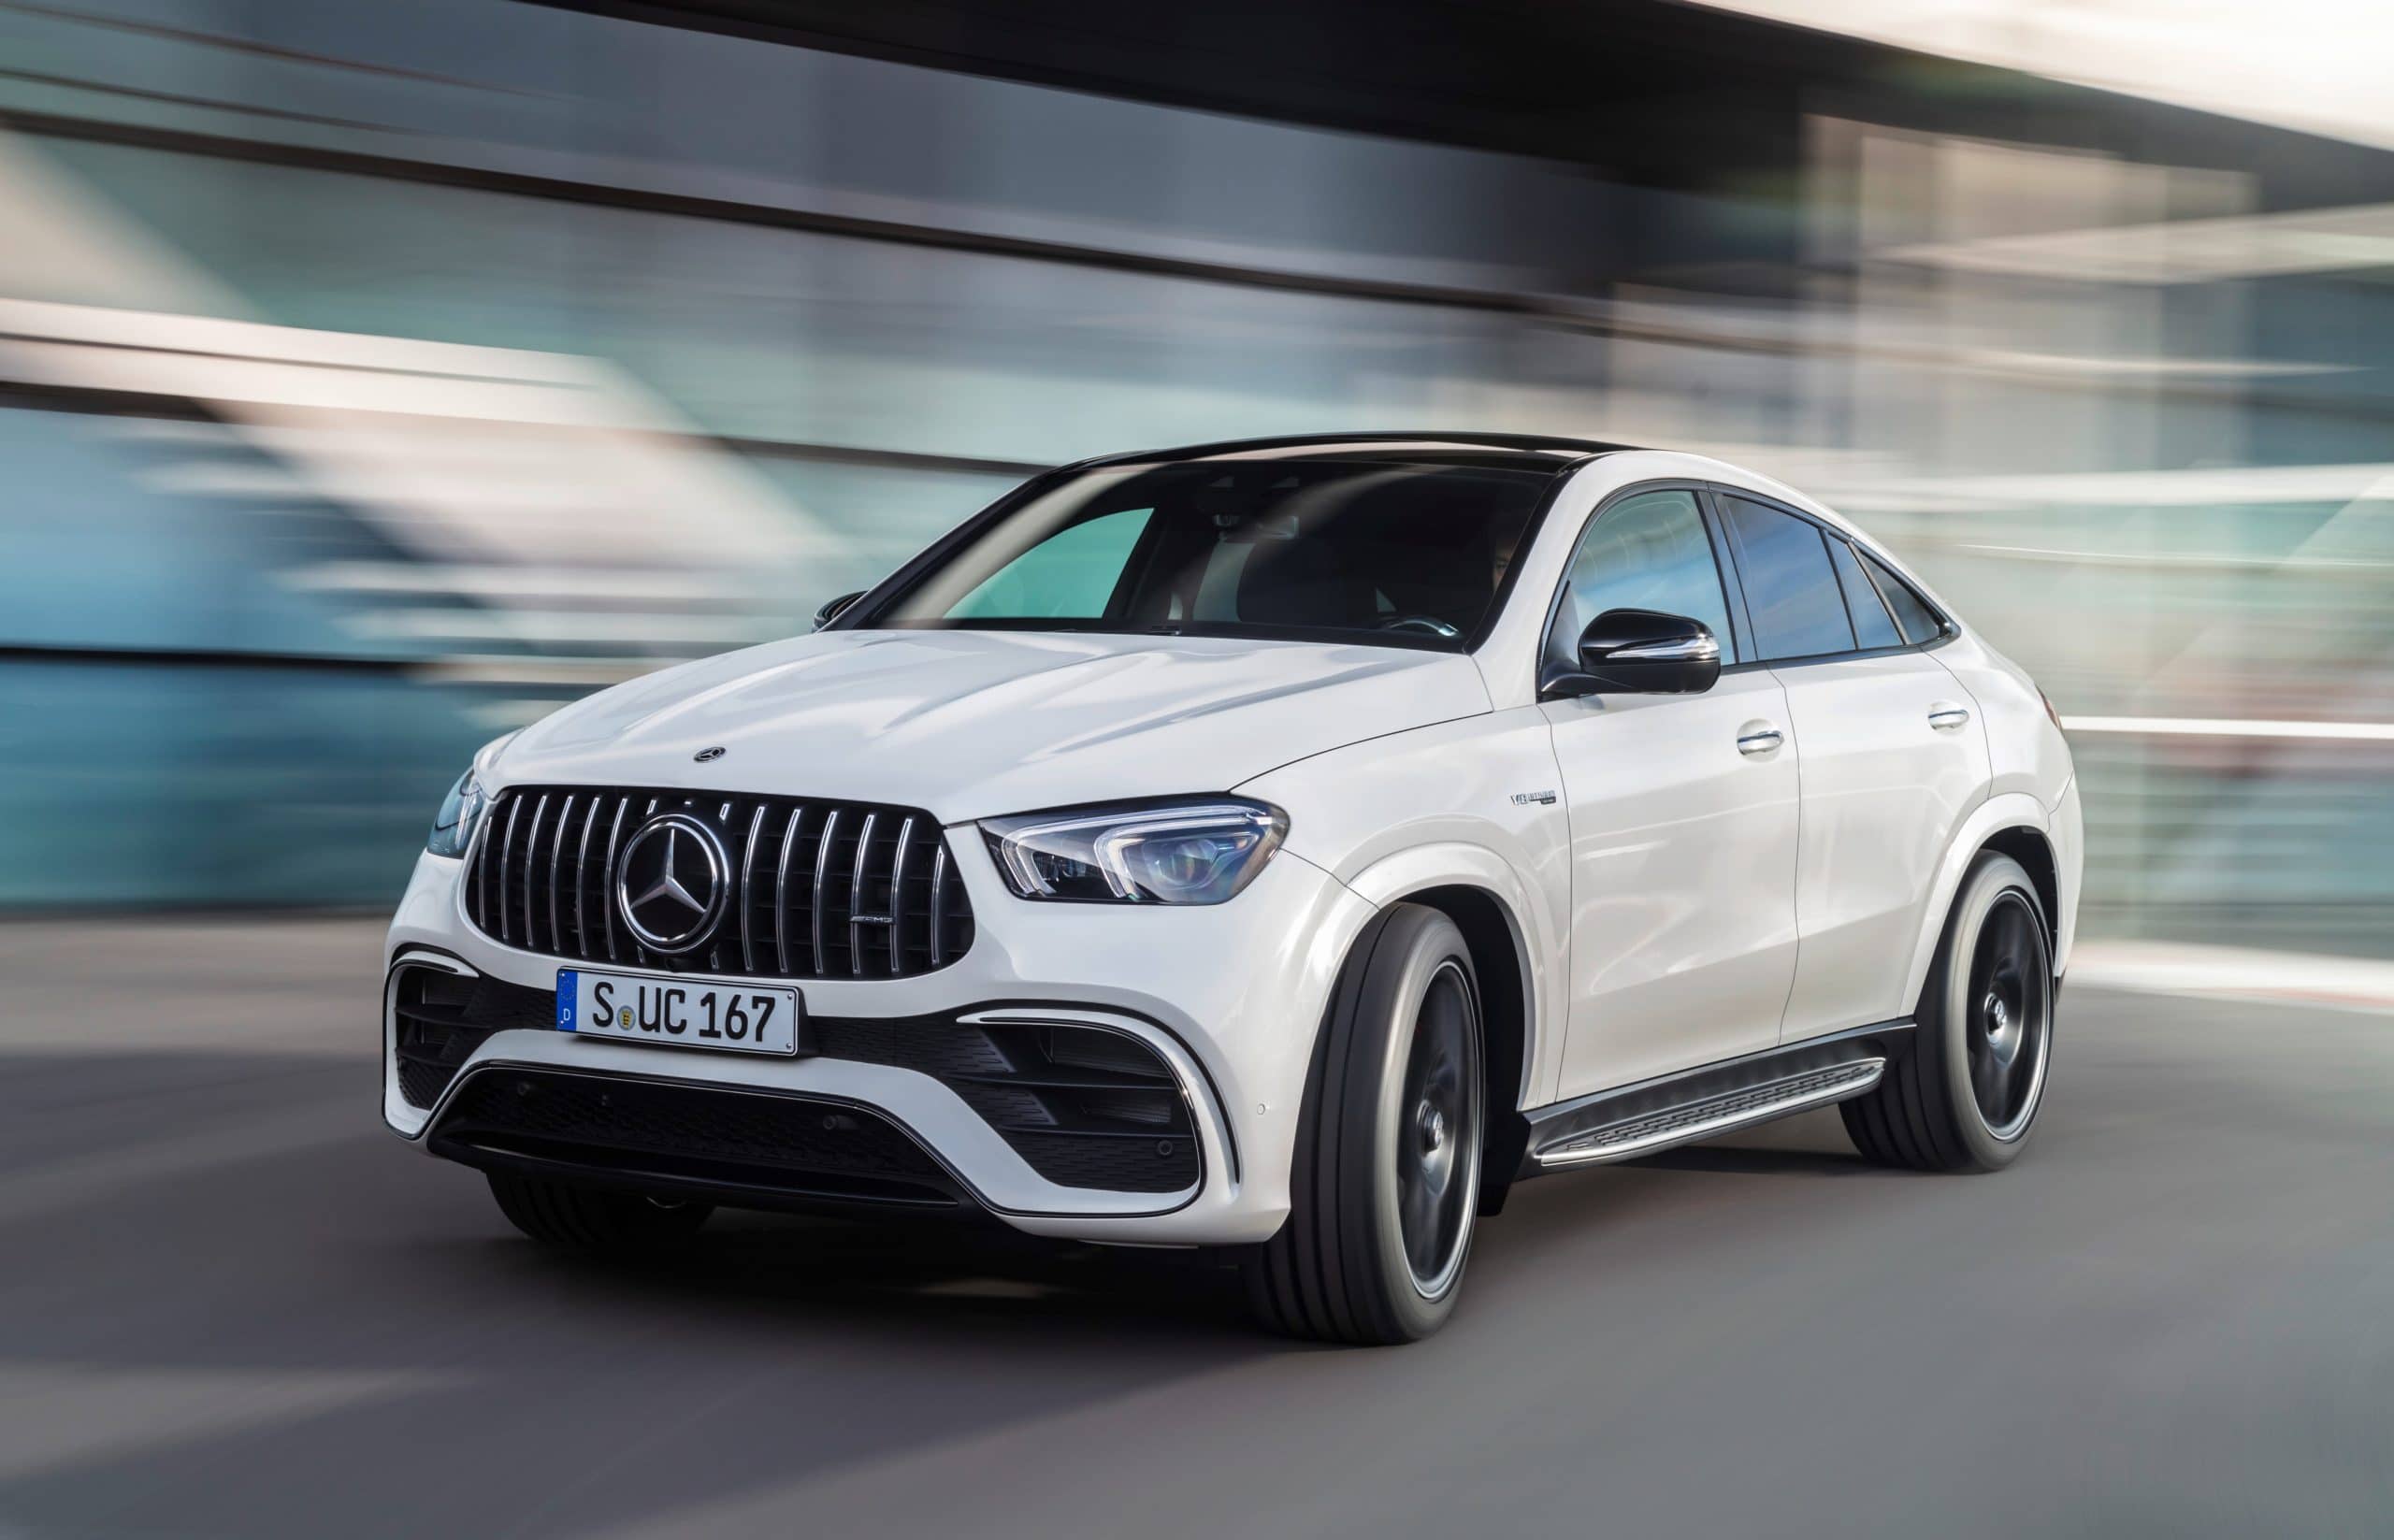 AMG 63 GLE S Coupe is more SUV in Every Way